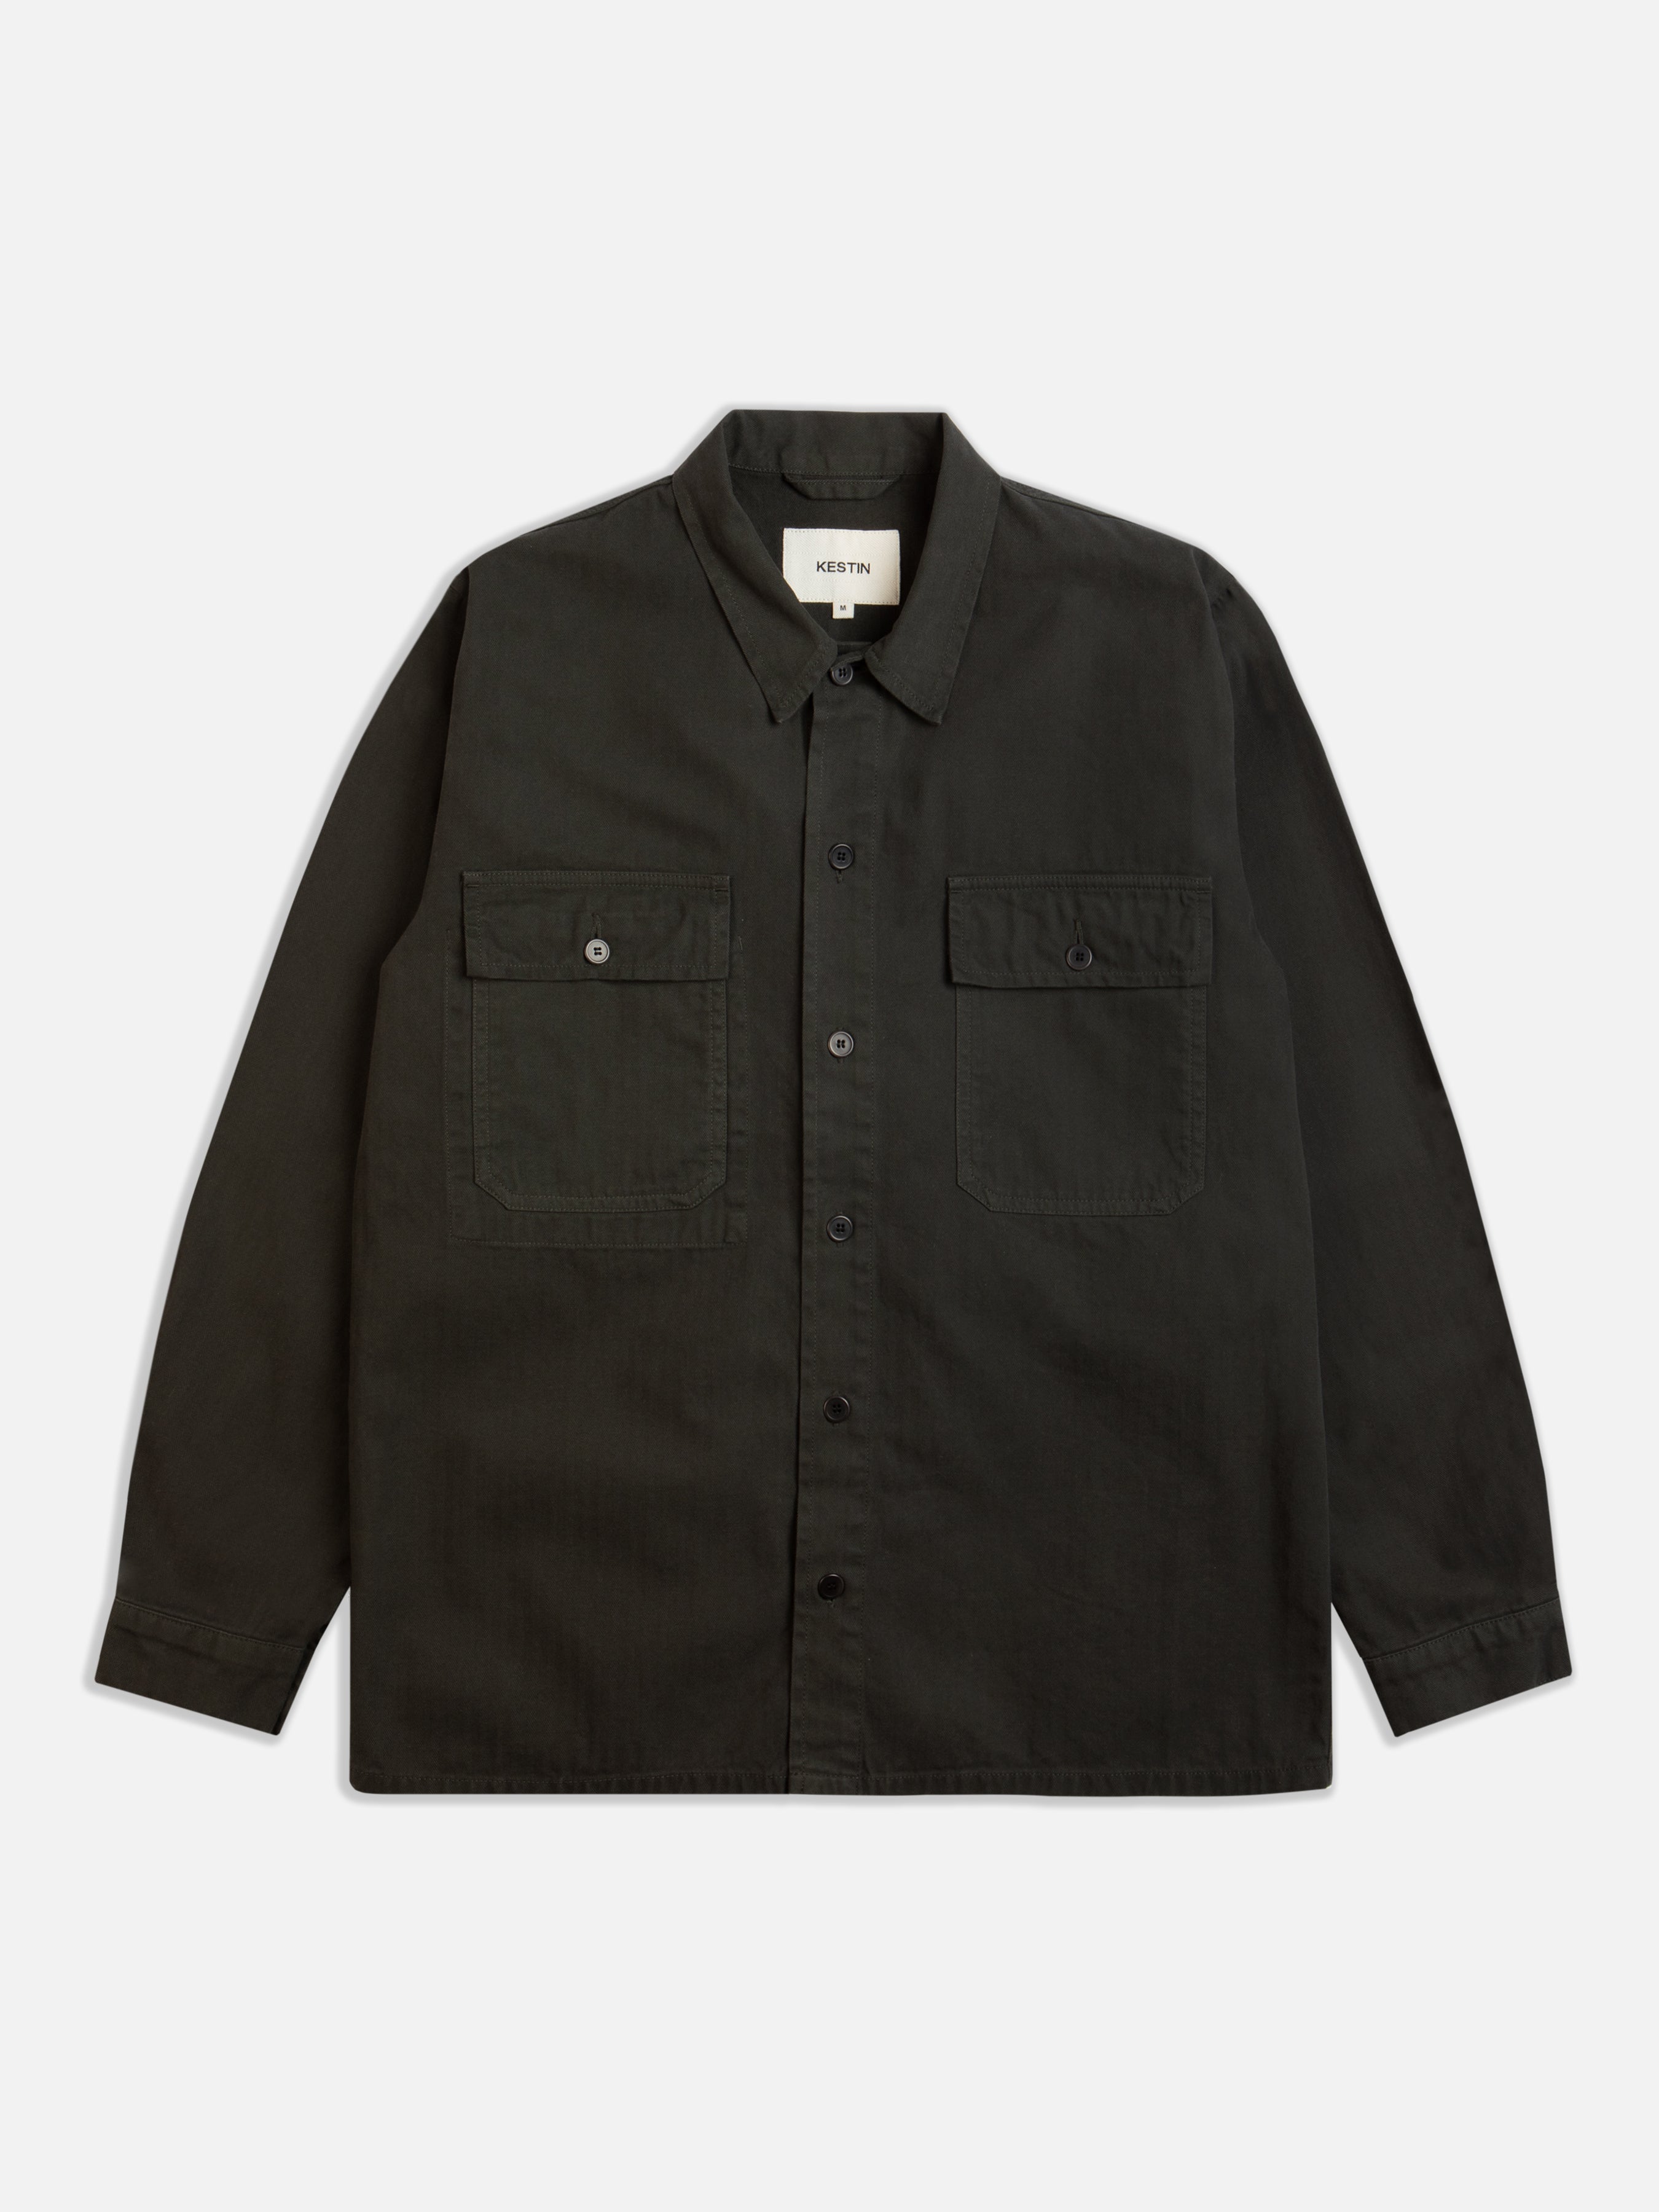 St Abbs Overshirt in Charcoal